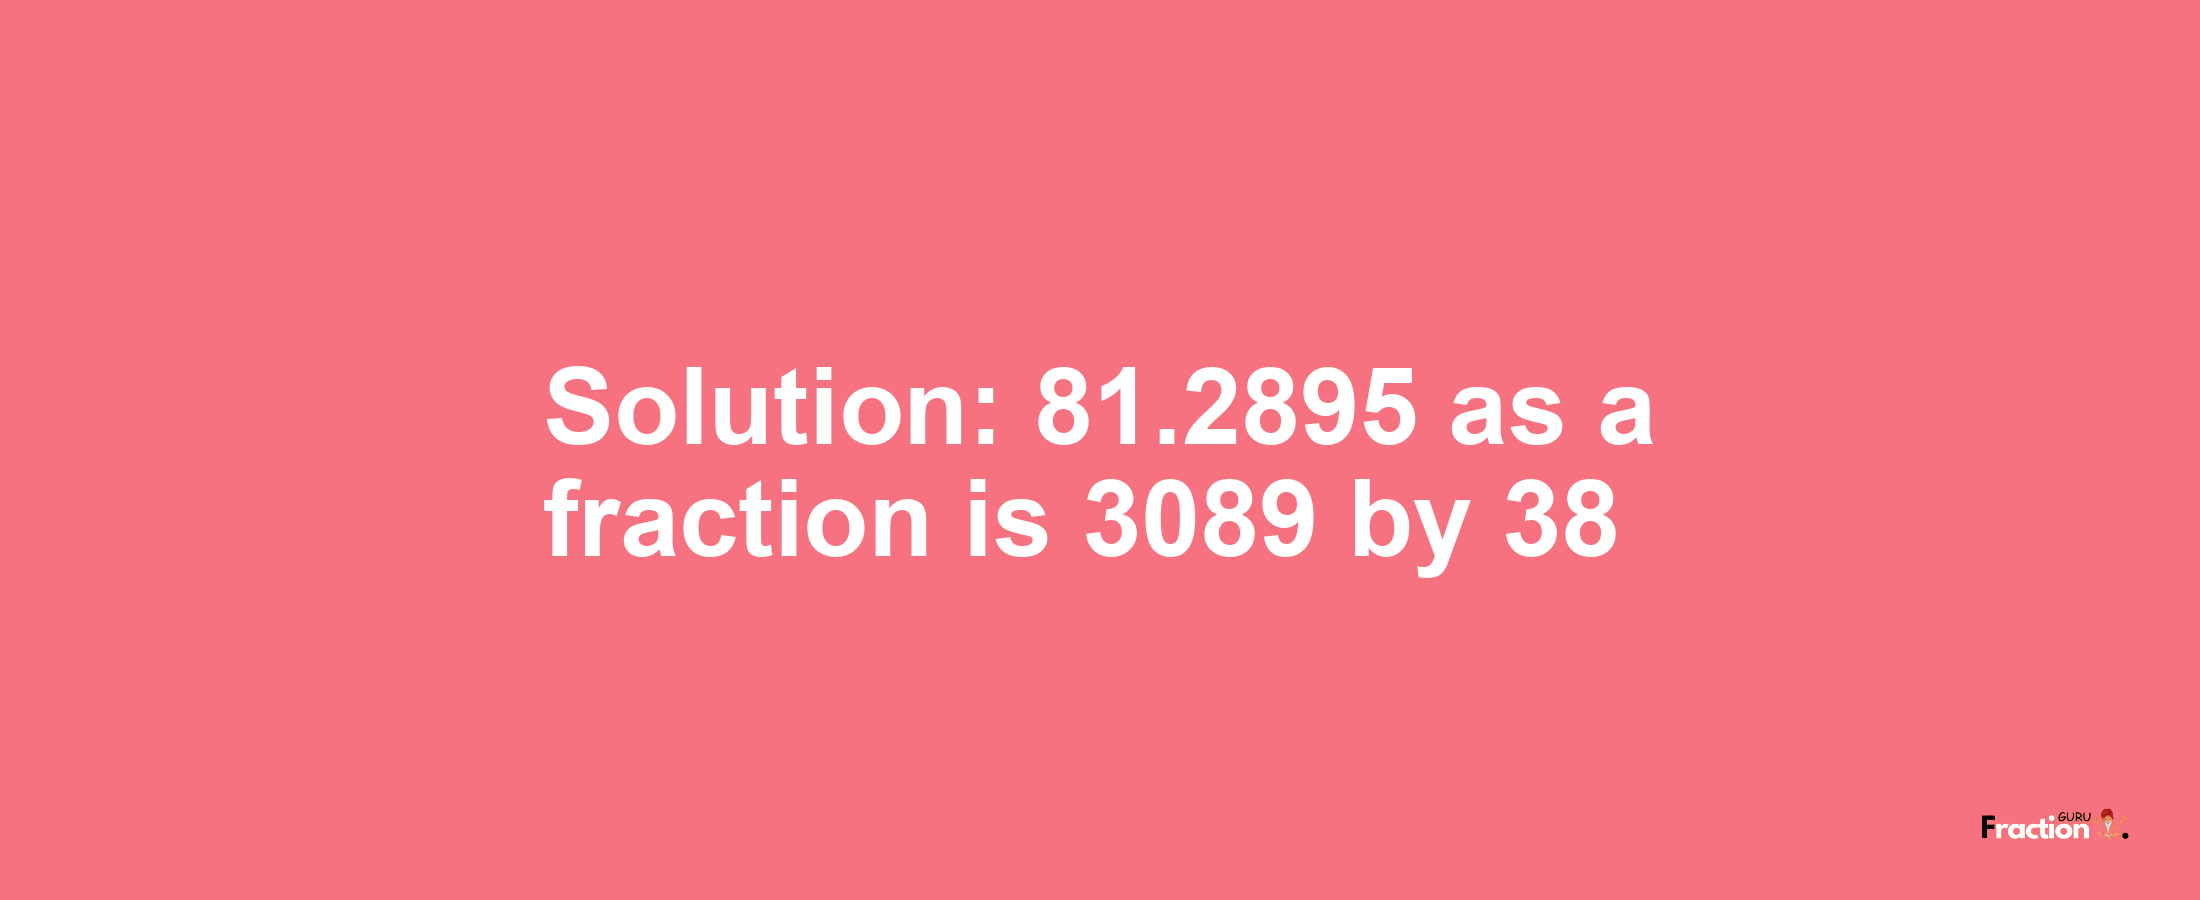 Solution:81.2895 as a fraction is 3089/38